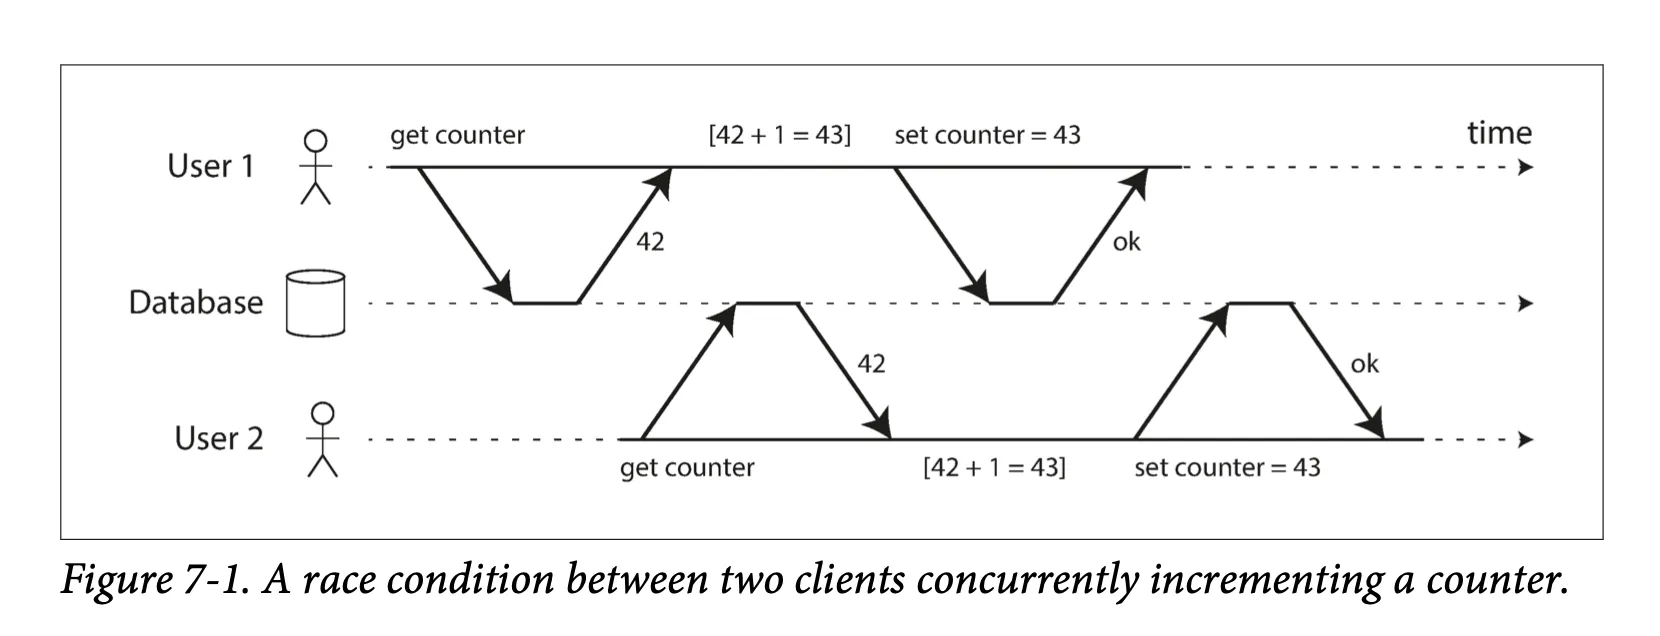 Race condition between two clients concurrently incrementing a counter